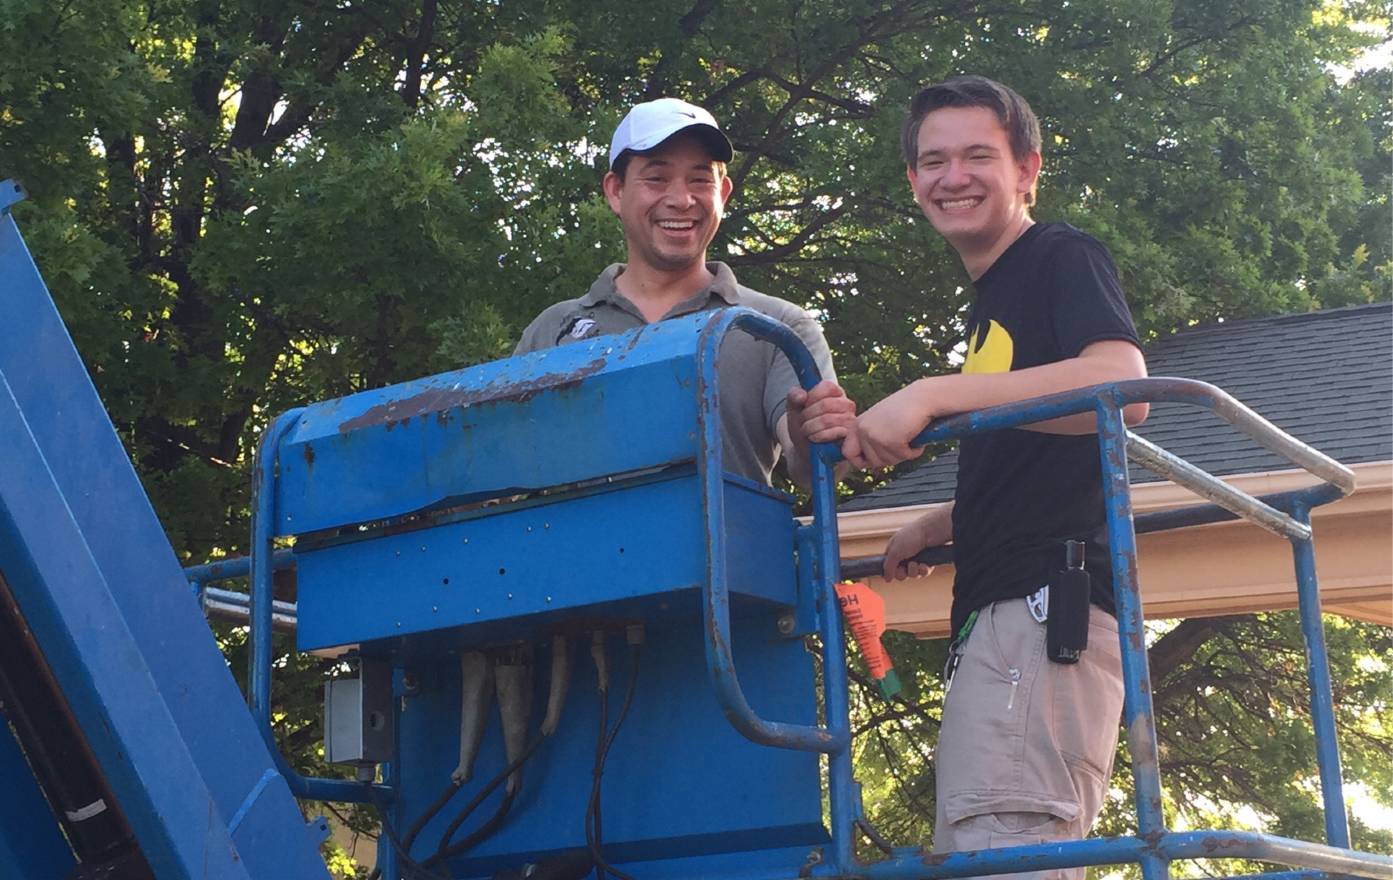 ivan and austin of Bat Specialists standing in a cherry picker